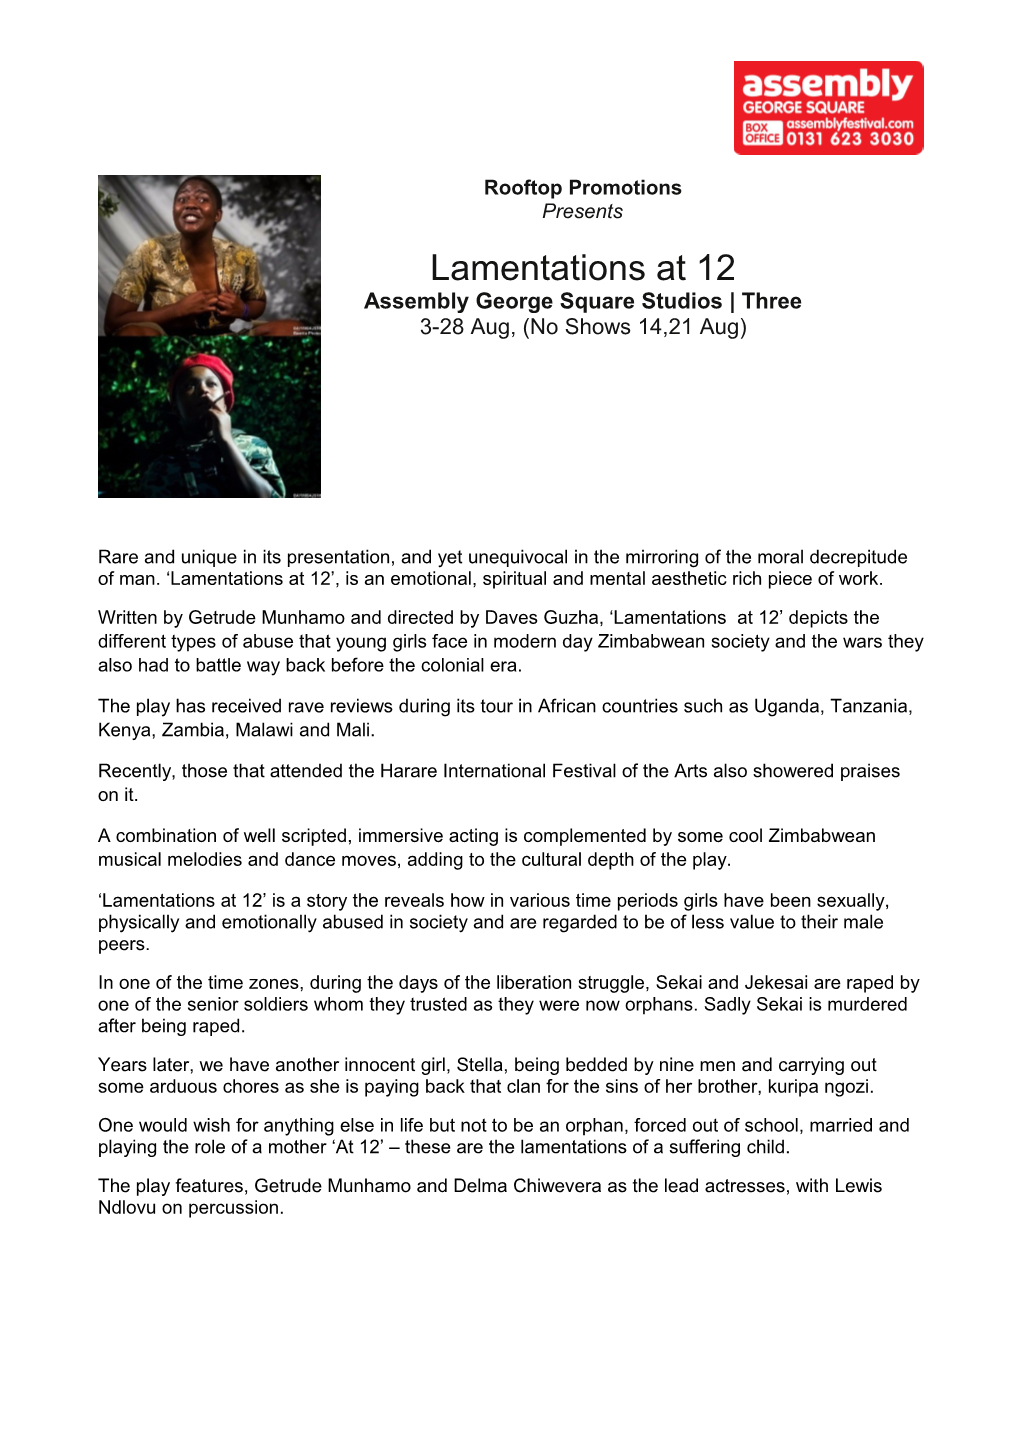 Written by Getrude Munhamo and Directed by Daves Guzha, Lamentations at 12 Depicts The